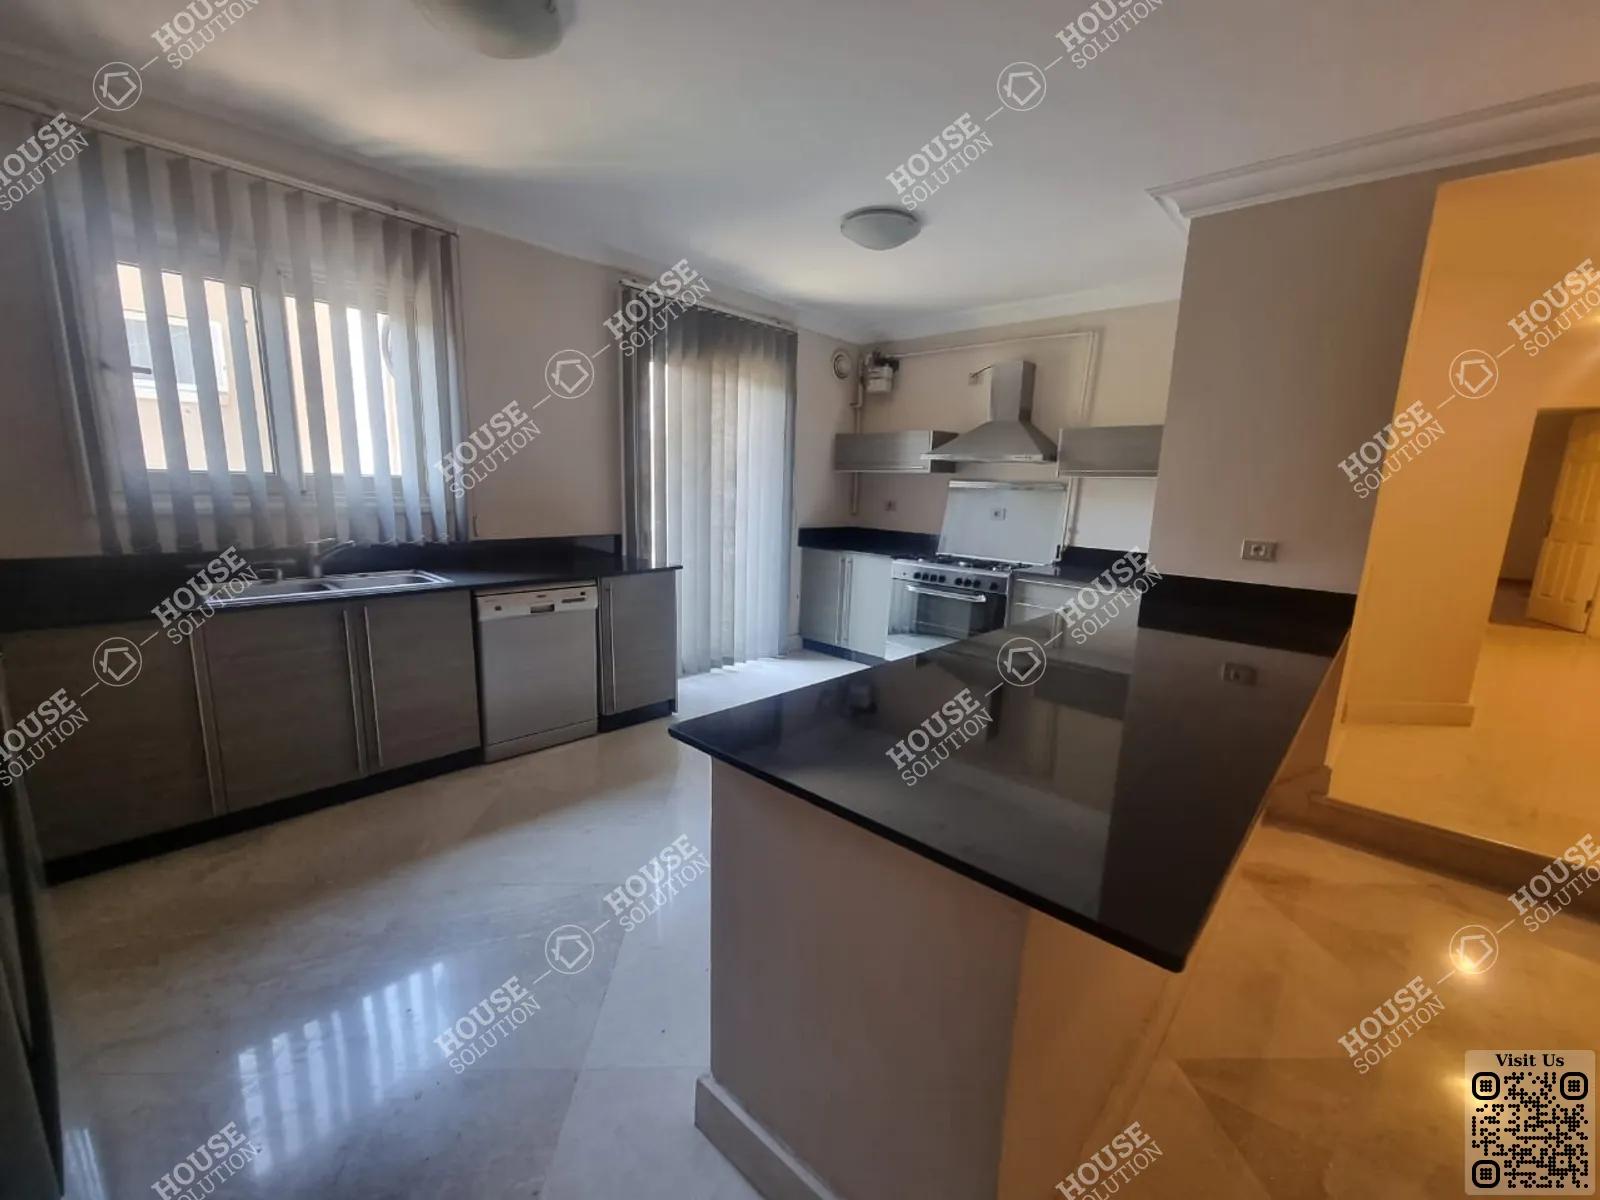 KITCHEN  @ Apartments For Rent In Maadi Maadi Sarayat Area: 320 m² consists of 4 Bedrooms 4 Bathrooms Modern furnished 5 stars #5696-1